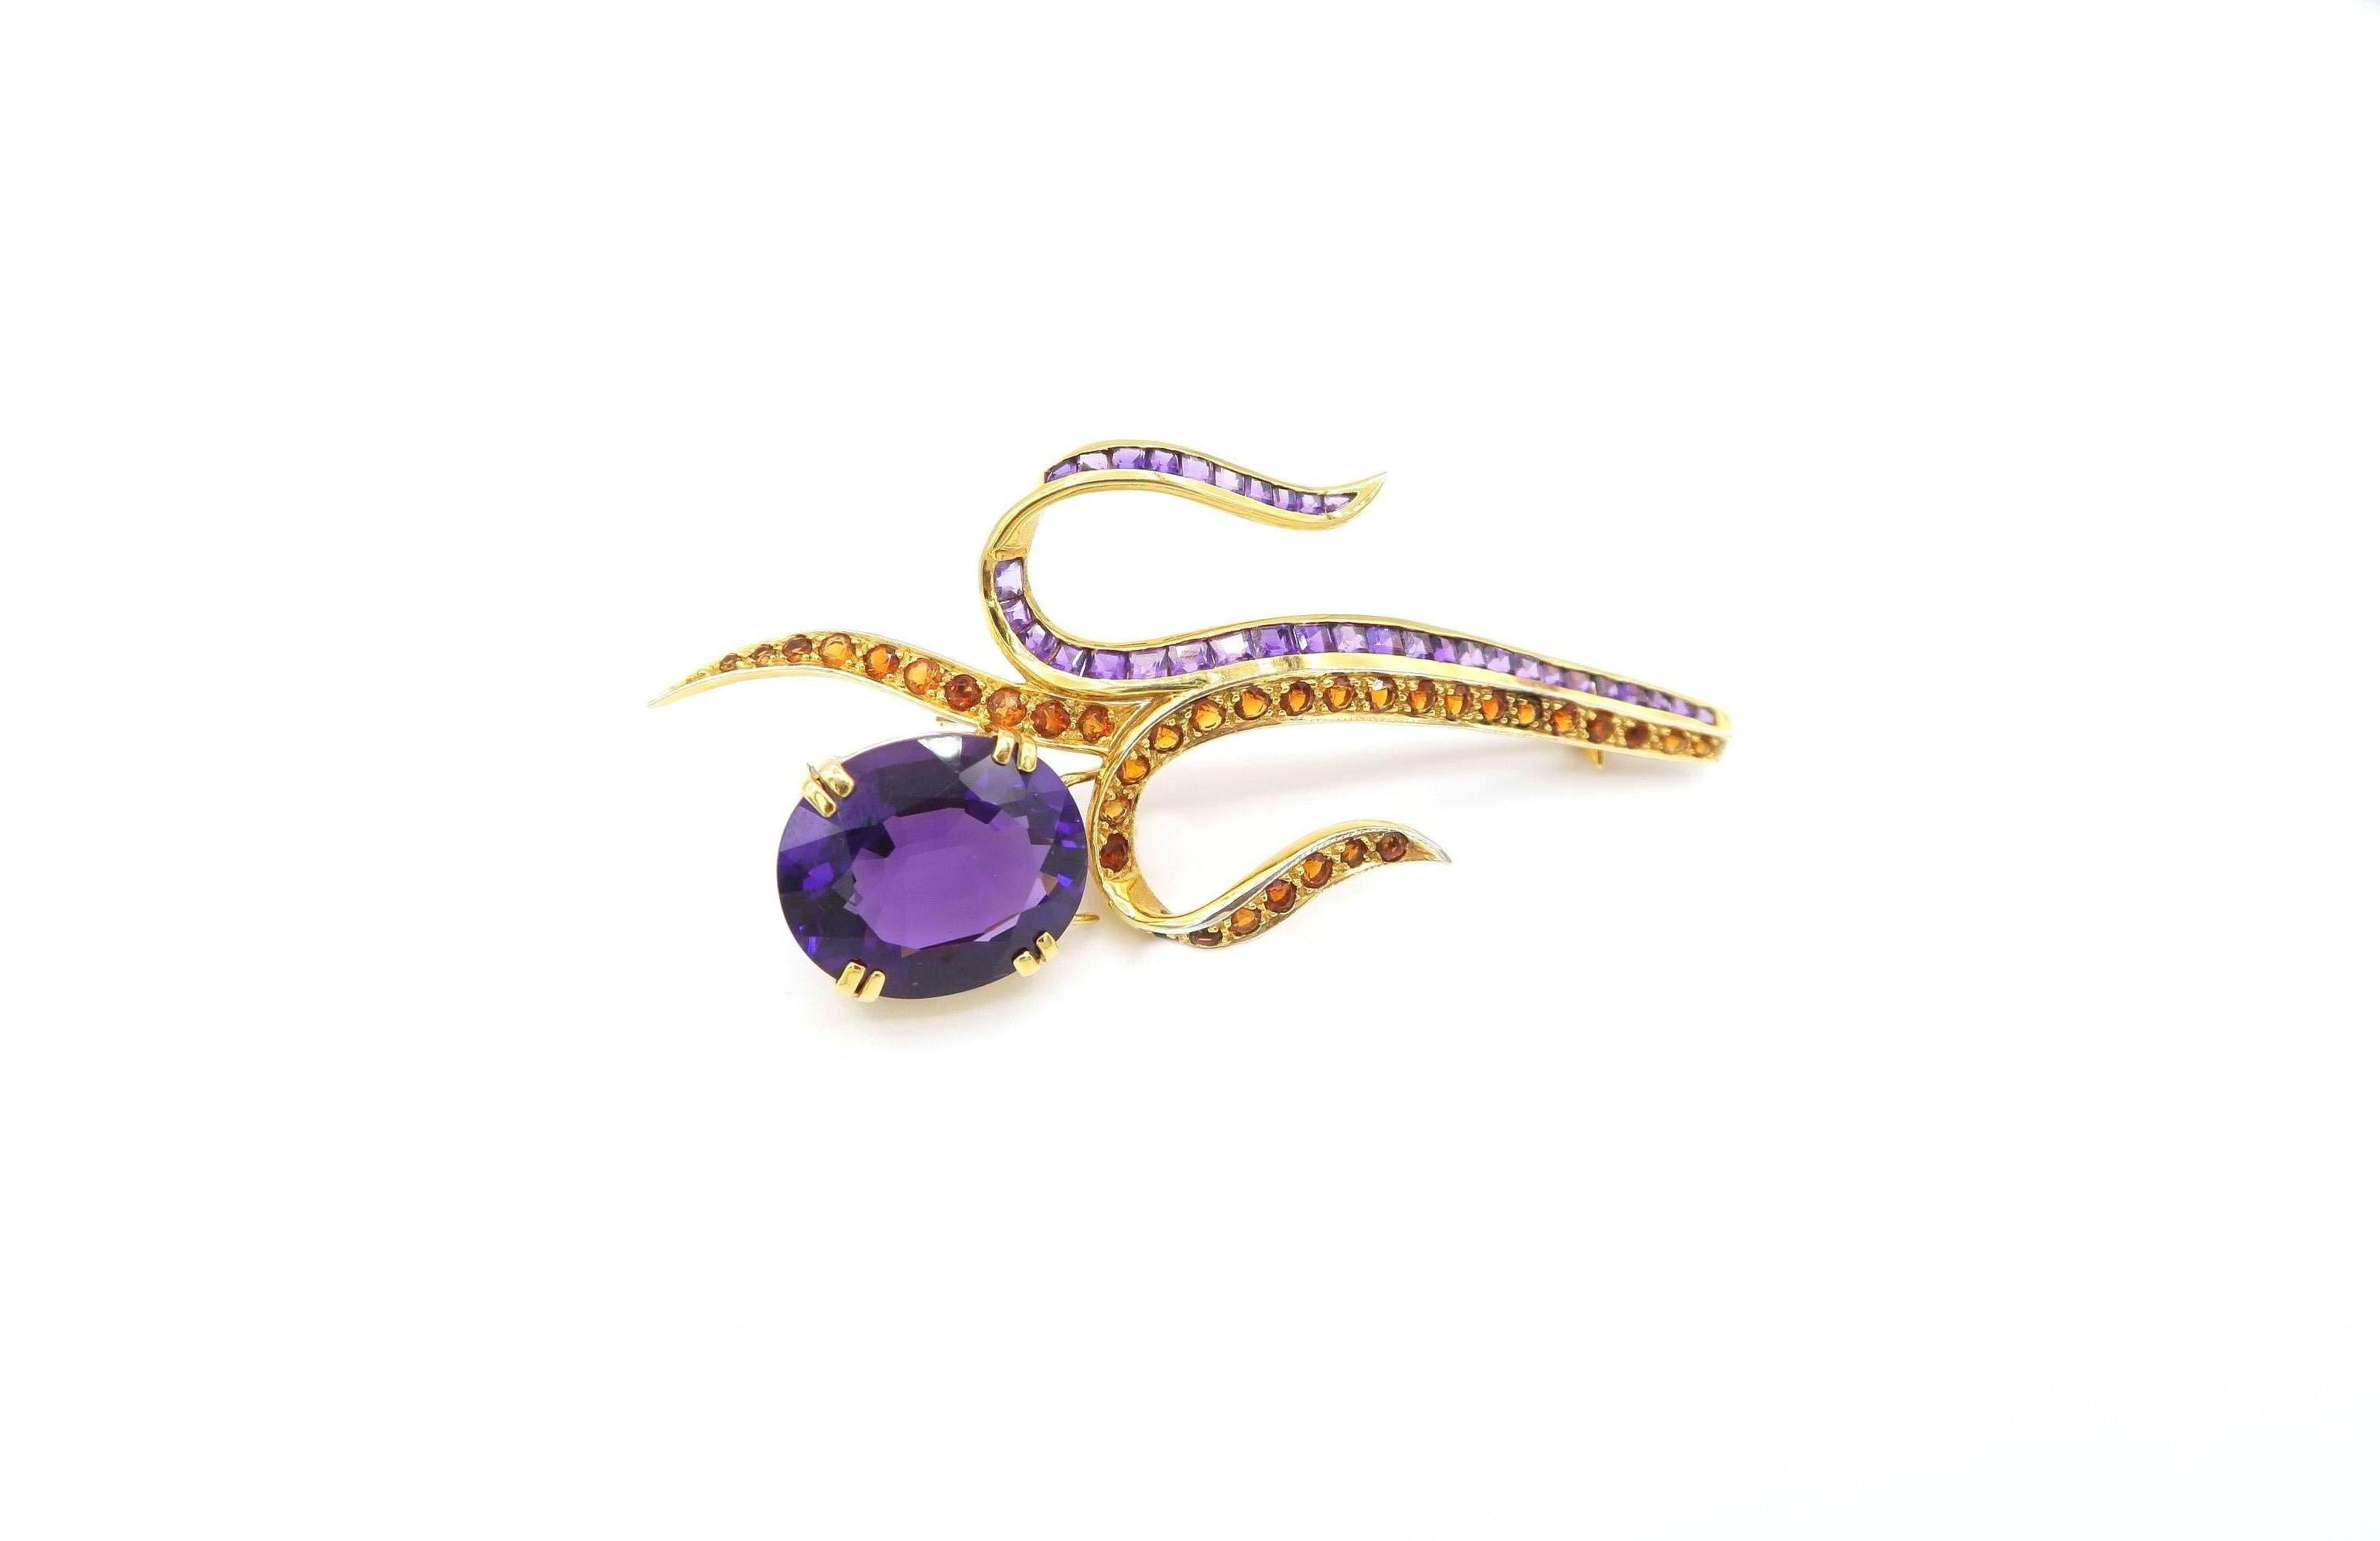 Important 14.18 Carat Oval Amethyst and 18.11 Carat Emerald Cut Citrine Interchangeable Brooch embellished with Citrine and Amethyst in 18K Gold Setting

Gold : 18K Yellow Gold, 22.20 g
Citrine: 18.11 ct
Oval Amethyst: 14.18 ct
Orange Sapphire: 2.86